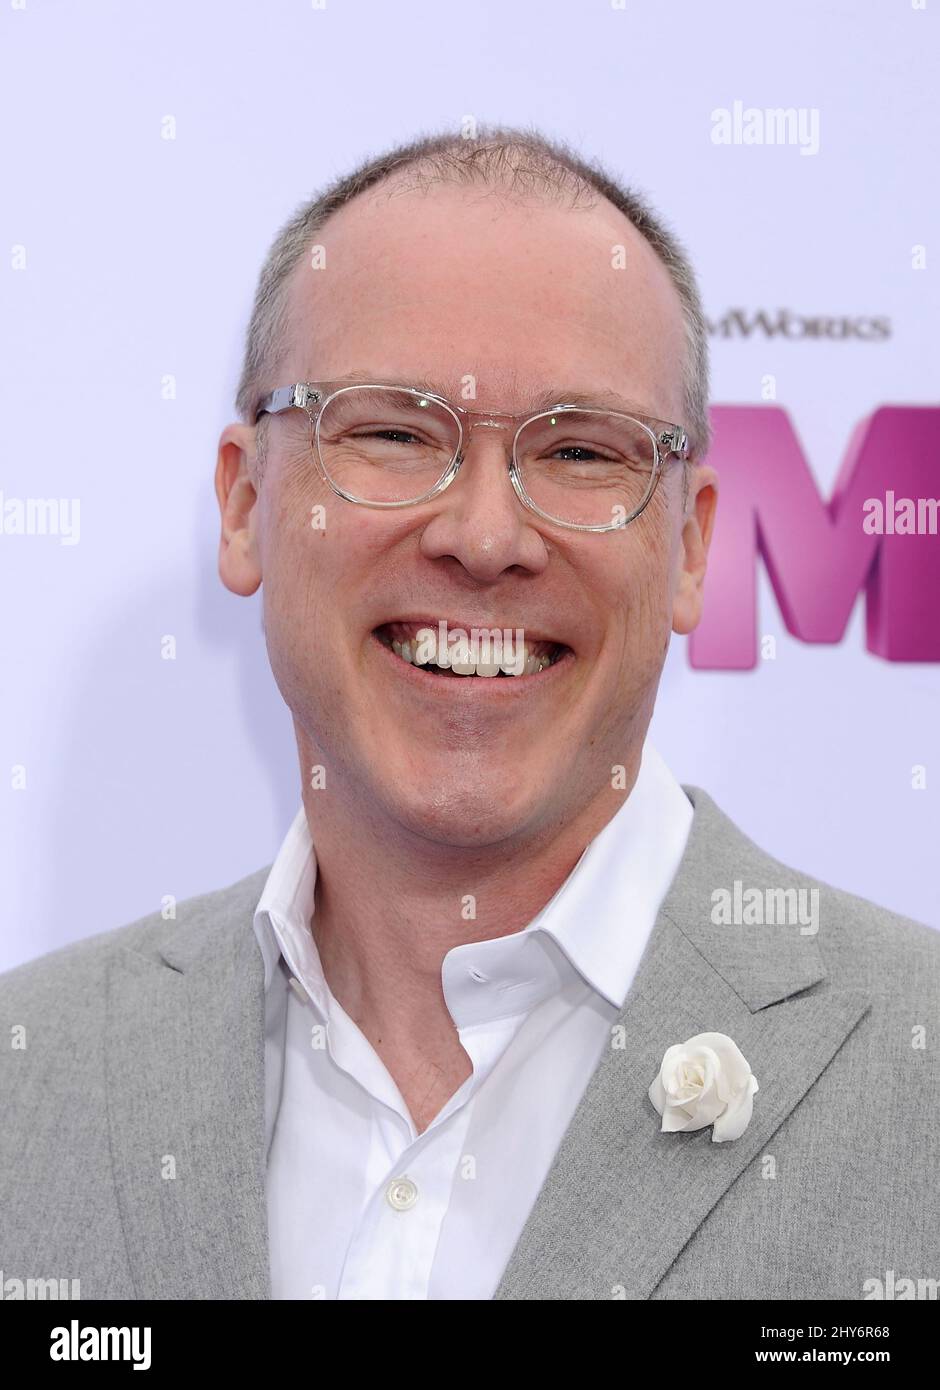 Tim Johnson attends the 'Home' Special Screening held at the Regency Village Theatre on Sunday, March 22, 2015, in Westwood, California. Stock Photo